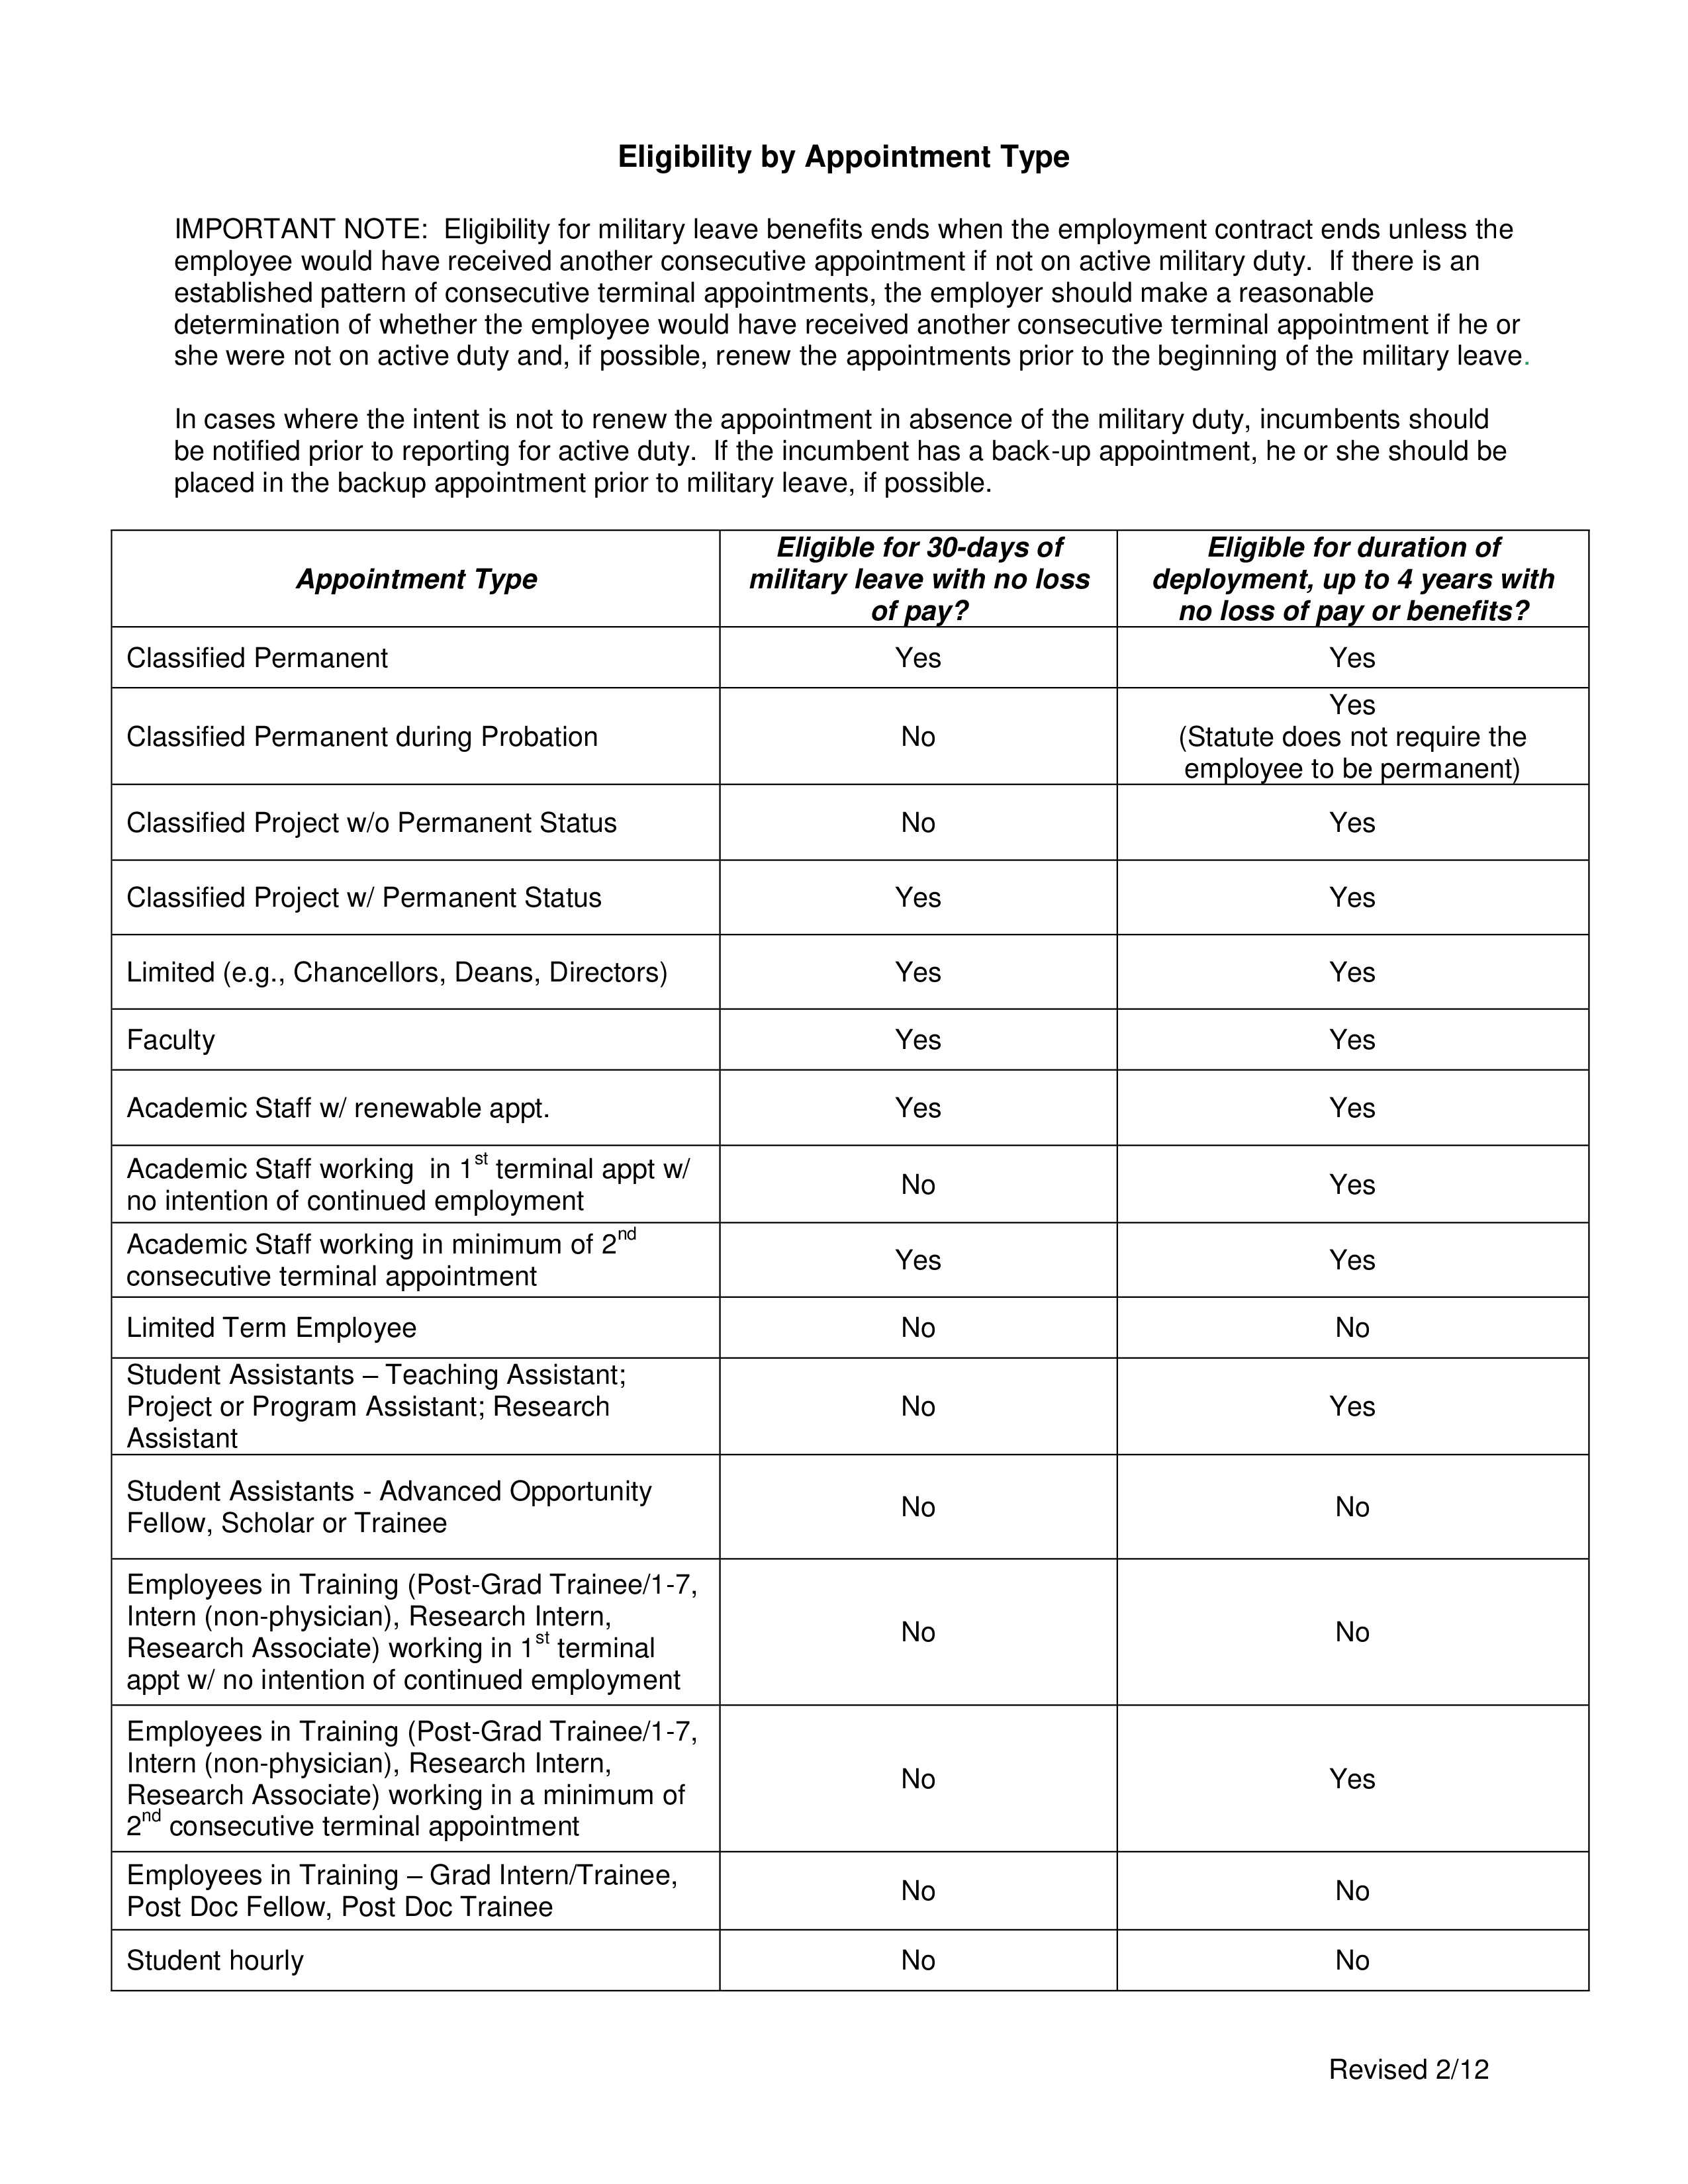 Military Leave benefits policy eligibility main image